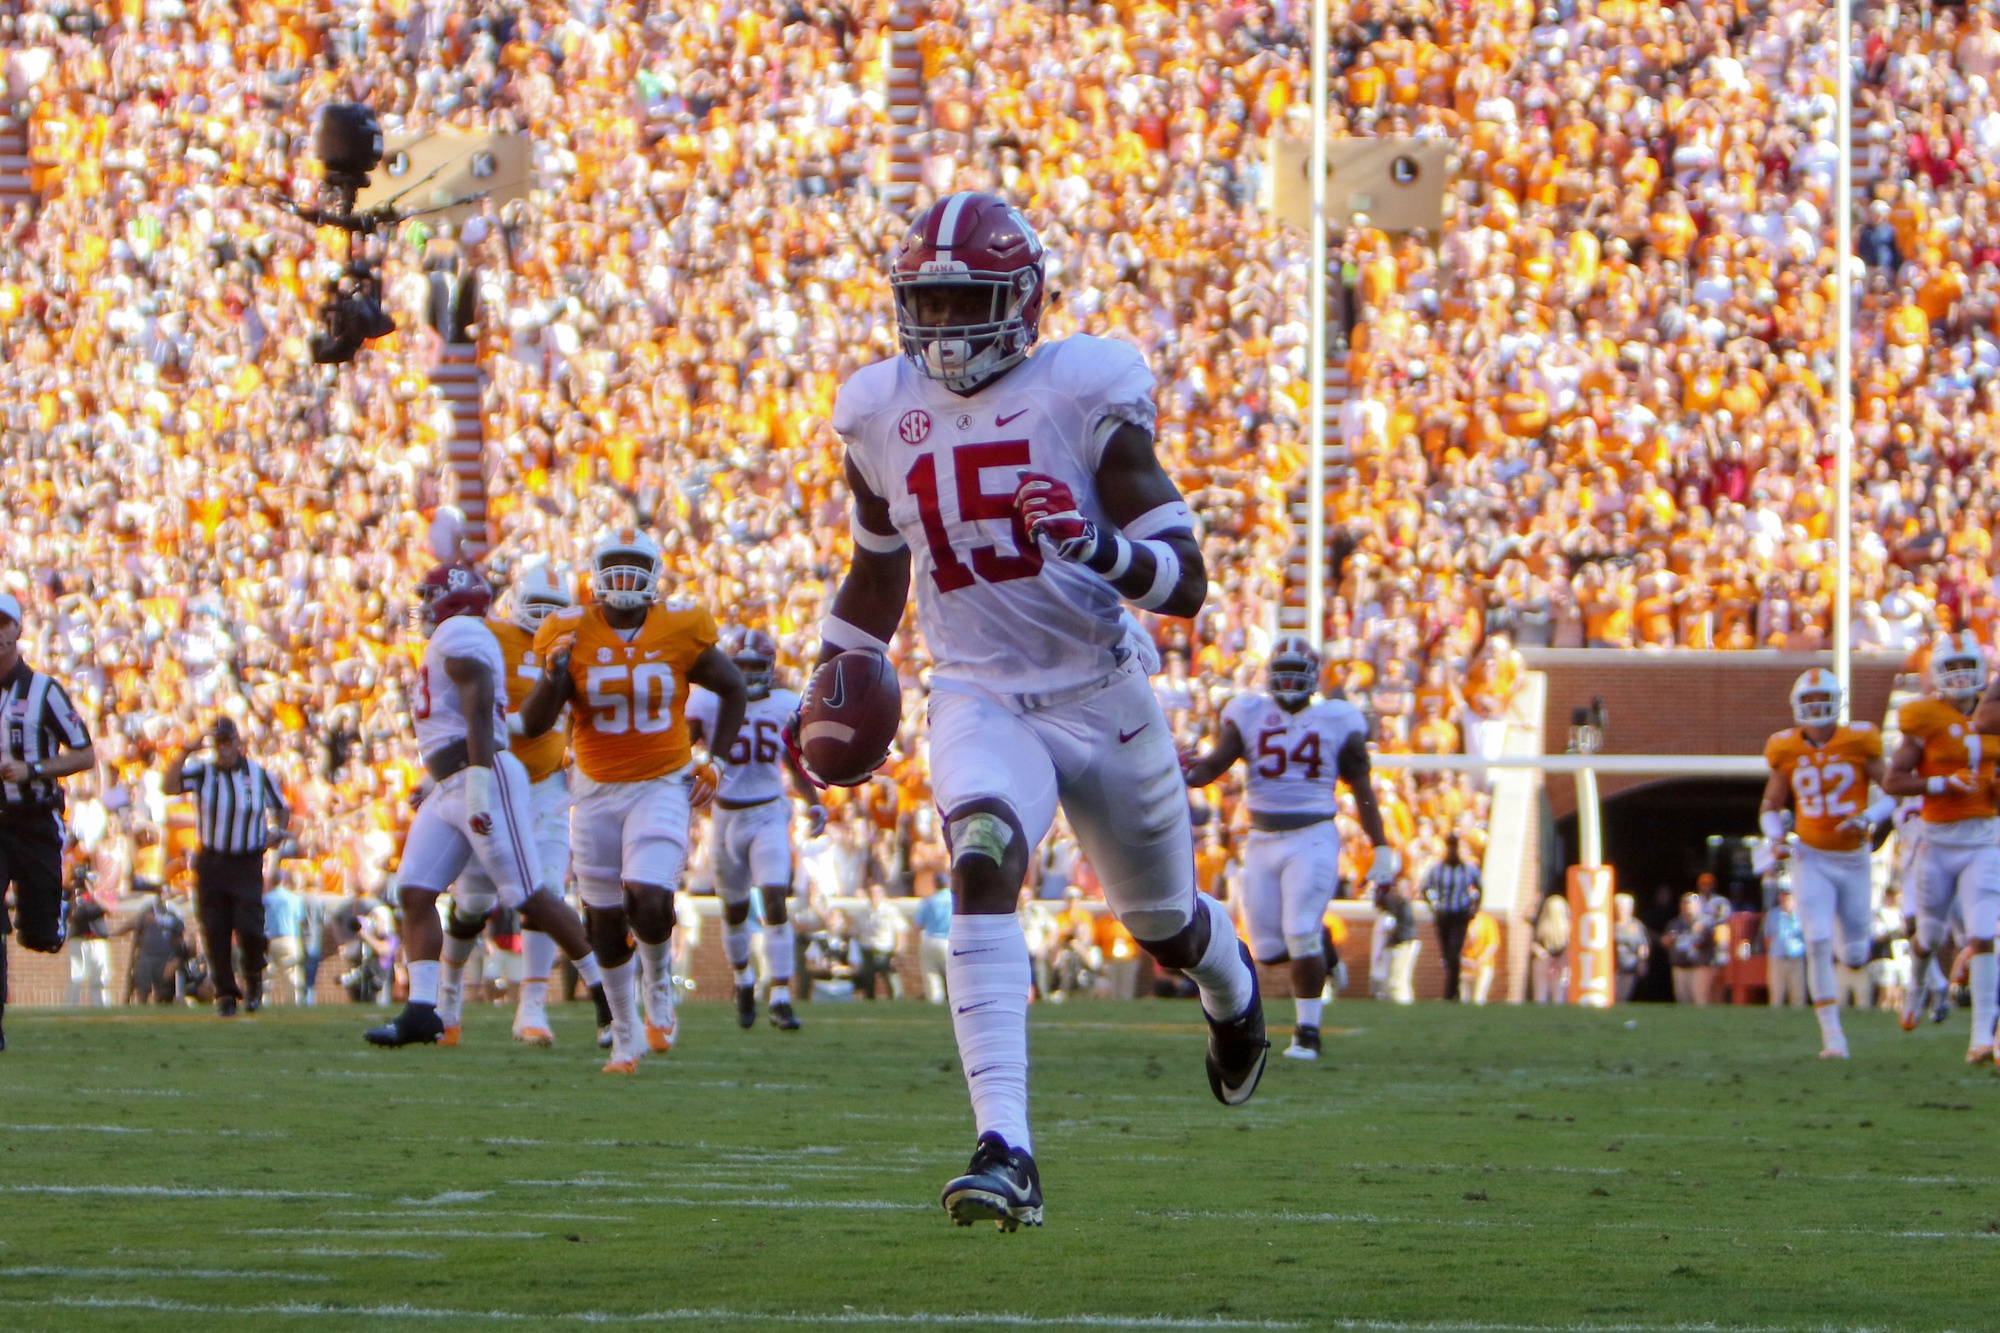 Oct 15, 2016; Knoxville, TN, USA; Alabama Crimson Tide defensive back Ronnie Harrison (15) returns an interception for a touchdown against the Tennessee Volunteers during the first half at Neyland Stadium. Mandatory Credit: Randy Sartin-USA TODAY Sports